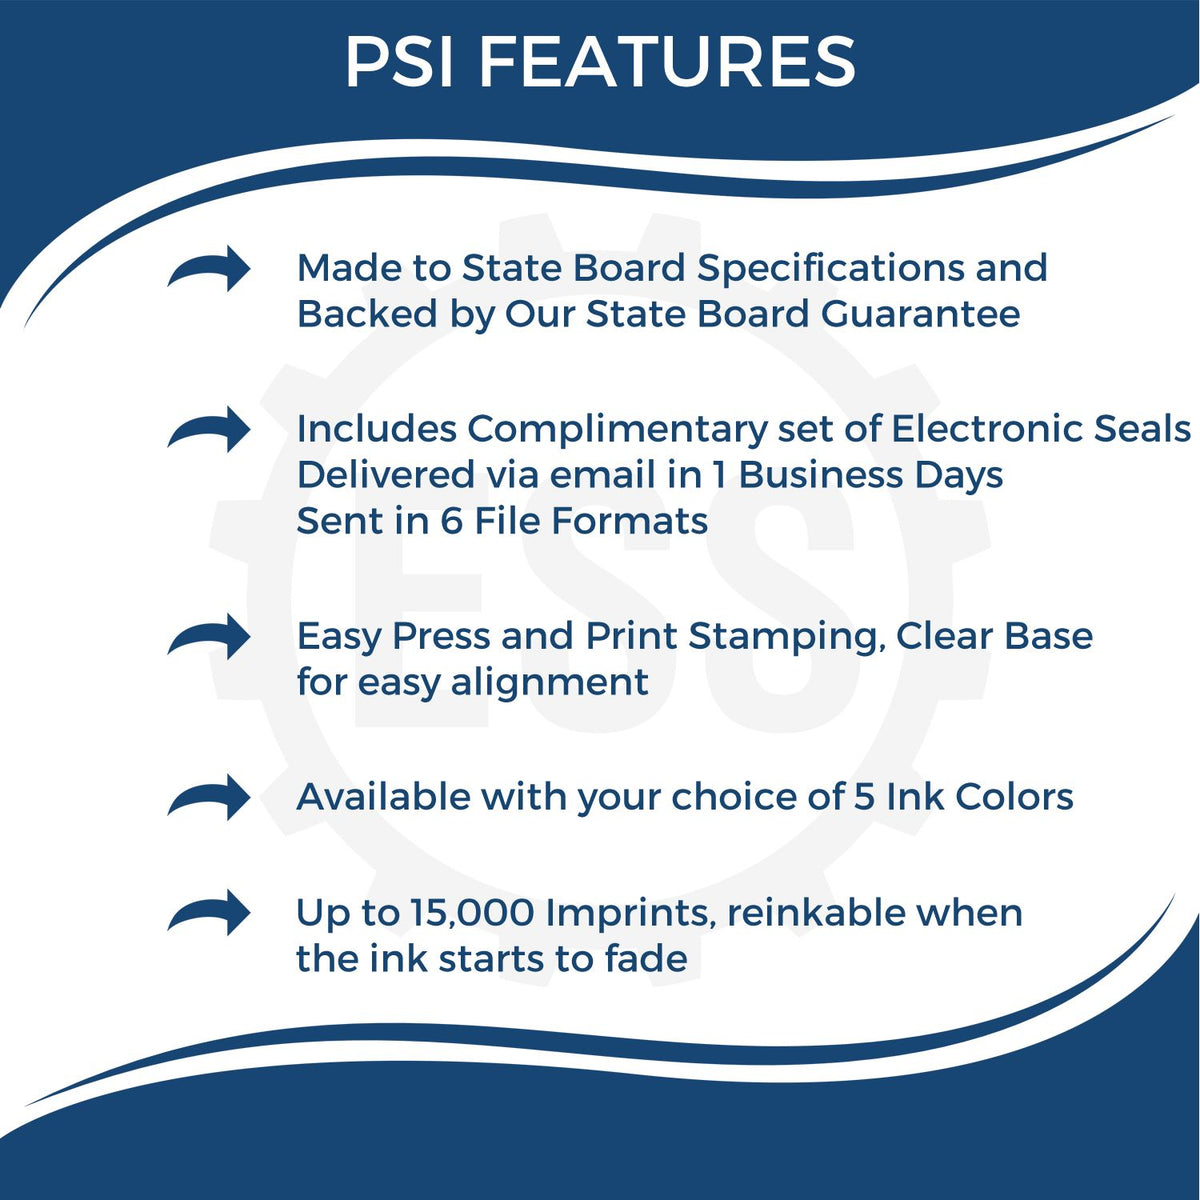 A picture of an infographic highlighting the selling points for the PSI California Notary Stamp